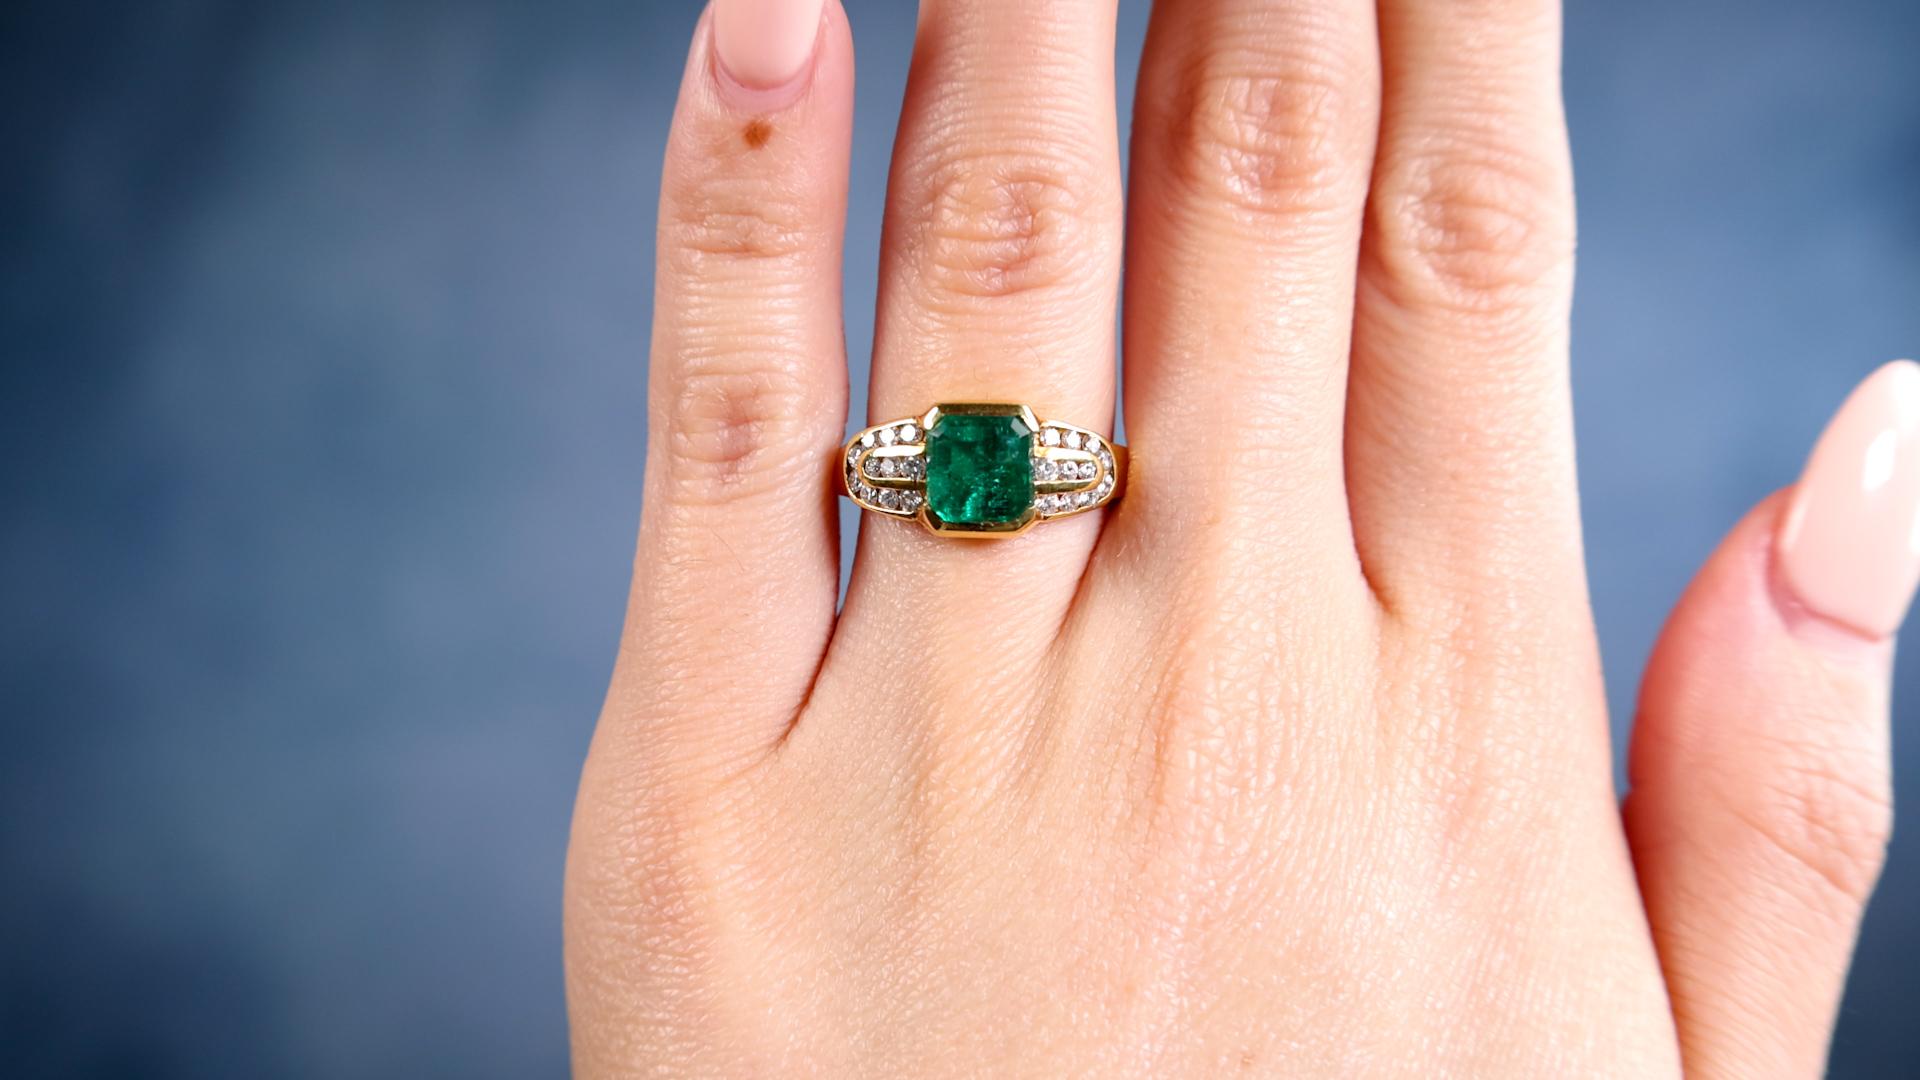 One Vintage Emerald Diamond 18k Yellow Gold Ring. Featuring one octagonal step cut emerald weighing approximately 1.45 carat. Accented by 22 round brilliant cut diamonds with a total weight of approximately 0.30 carat, graded F-G color, VS clarity.